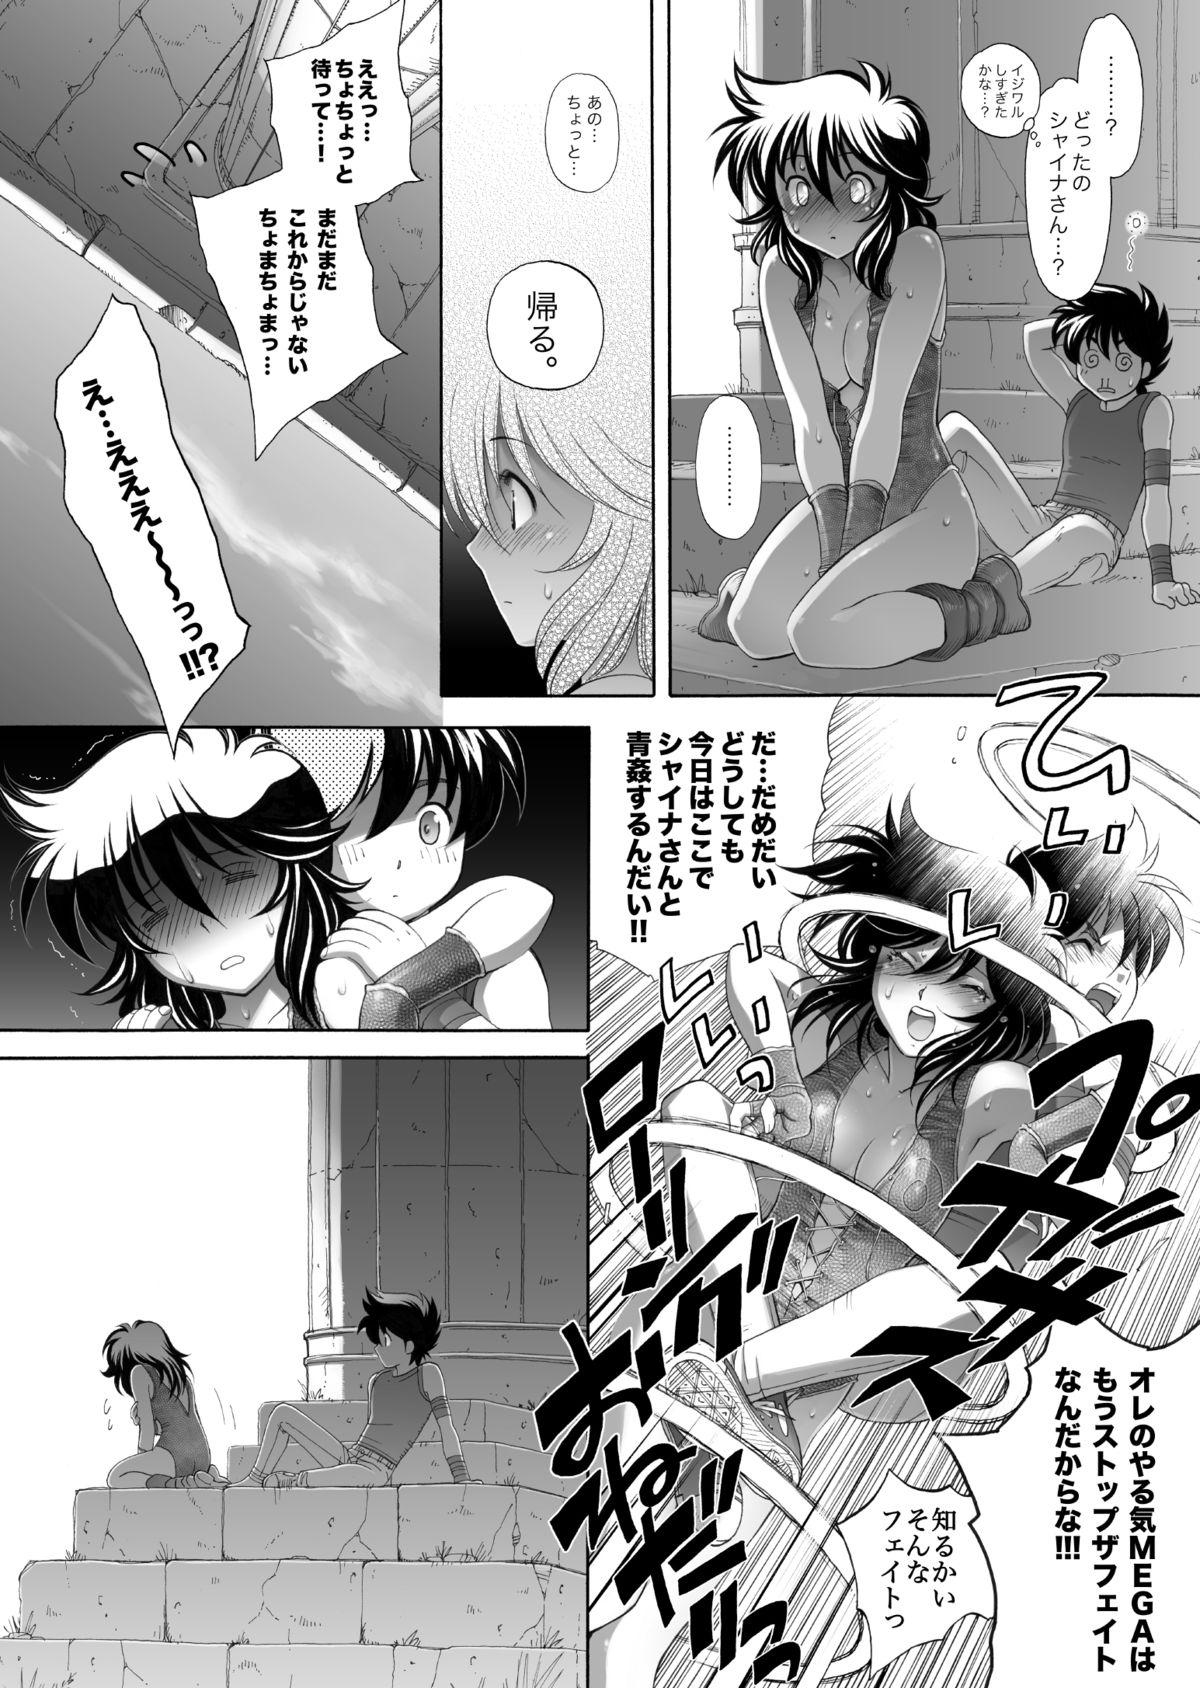 Shesafreak S.I.S.I.O.K.N.M.A. II - Saint seiya Kitchen - Page 11